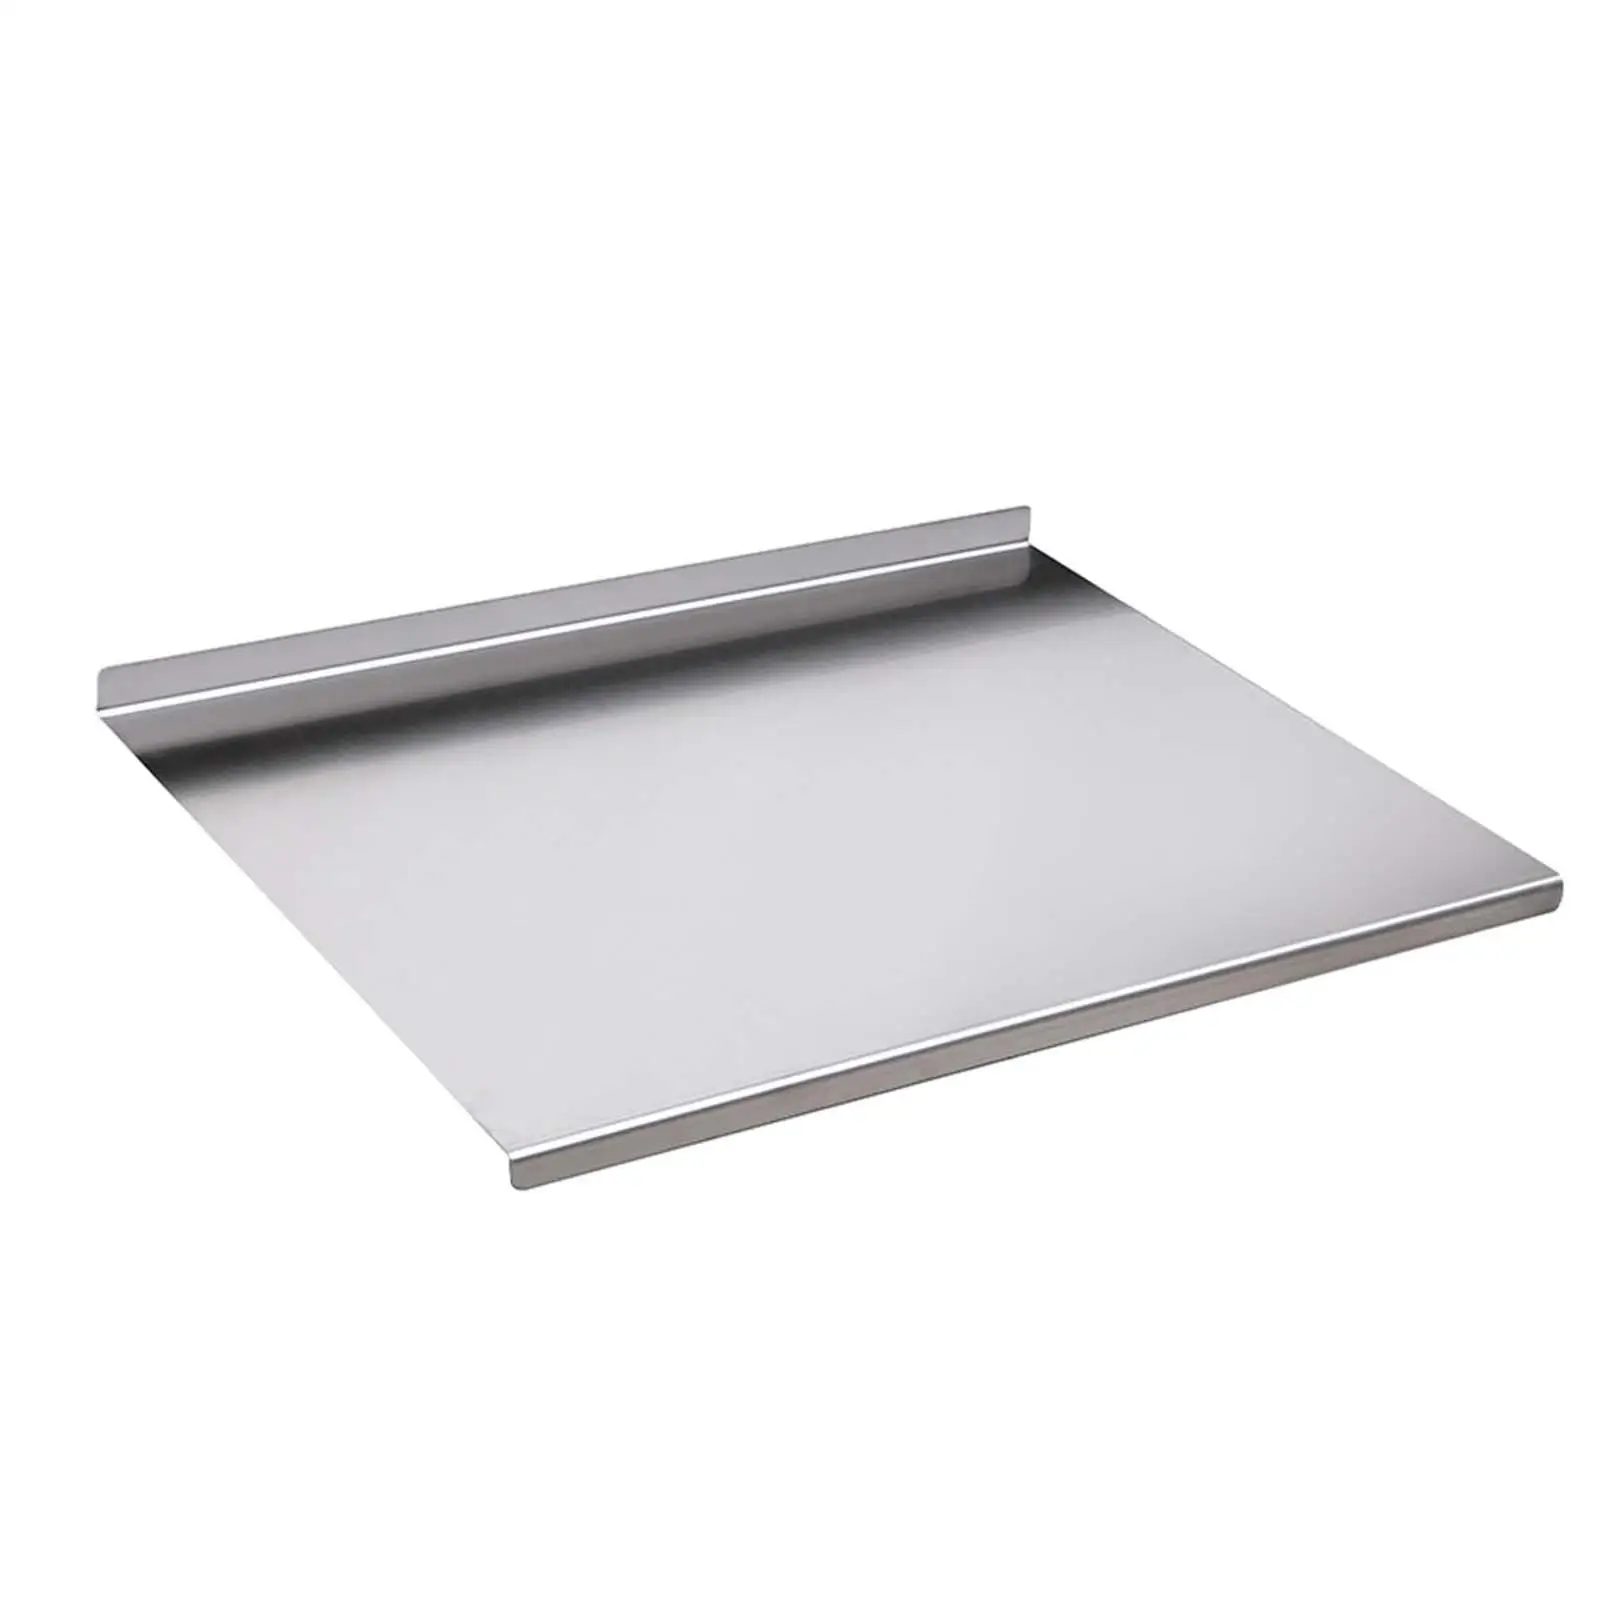 Stainless Steel Chopping Board Easily to Clean Pizza Biscuits Board Heavy Cutting Board Nonstick Baking Board 40cmx30cm